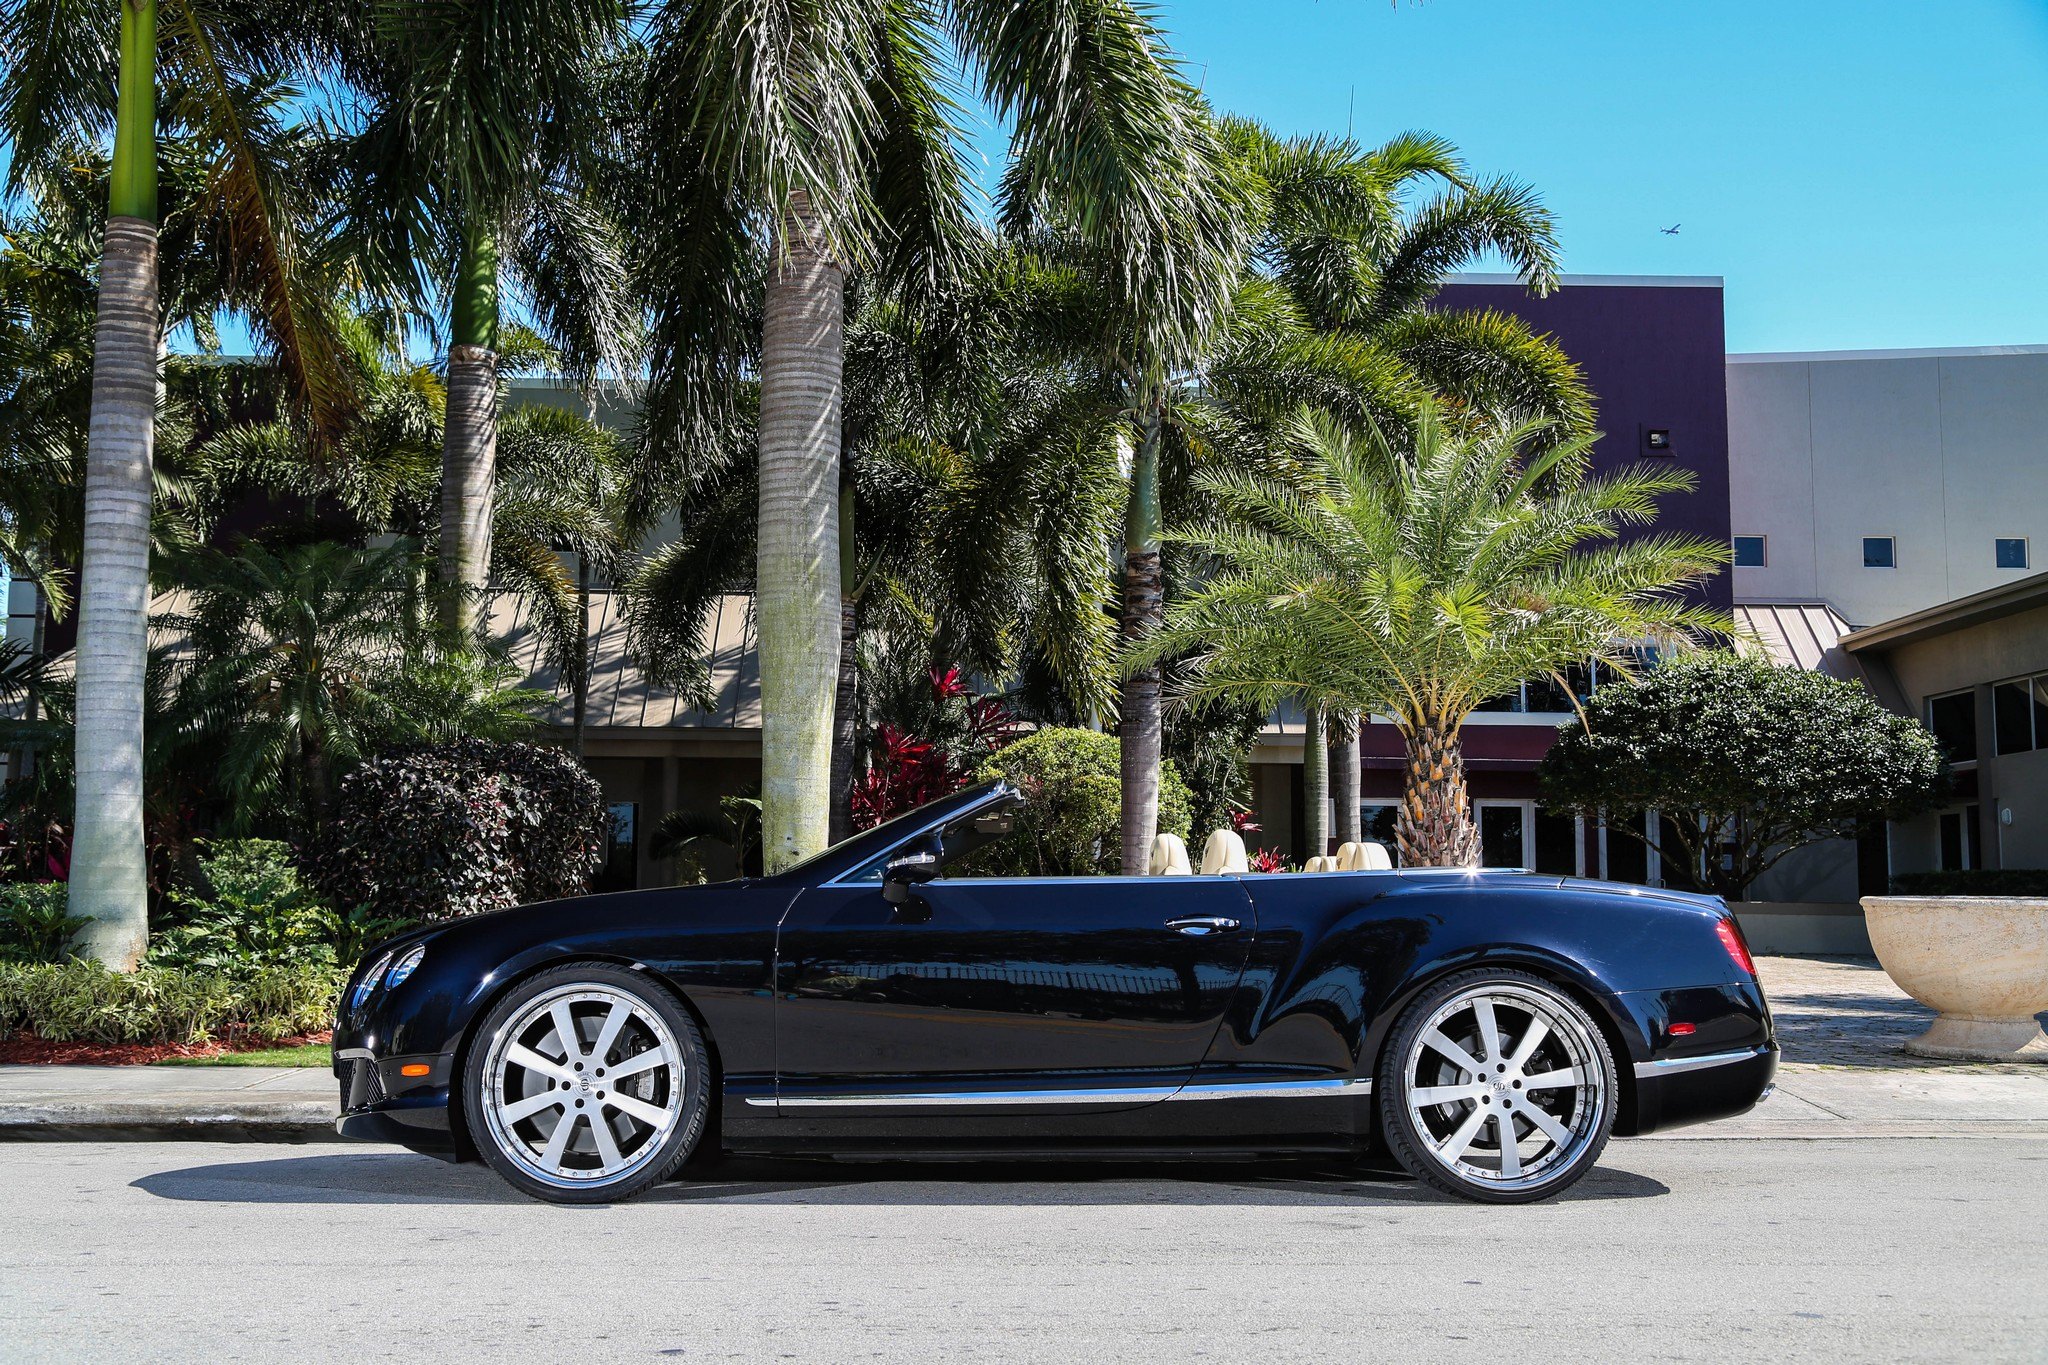 Aftermarket Side Skirts on Black Bentley Continental - Photo by Strasse Forged